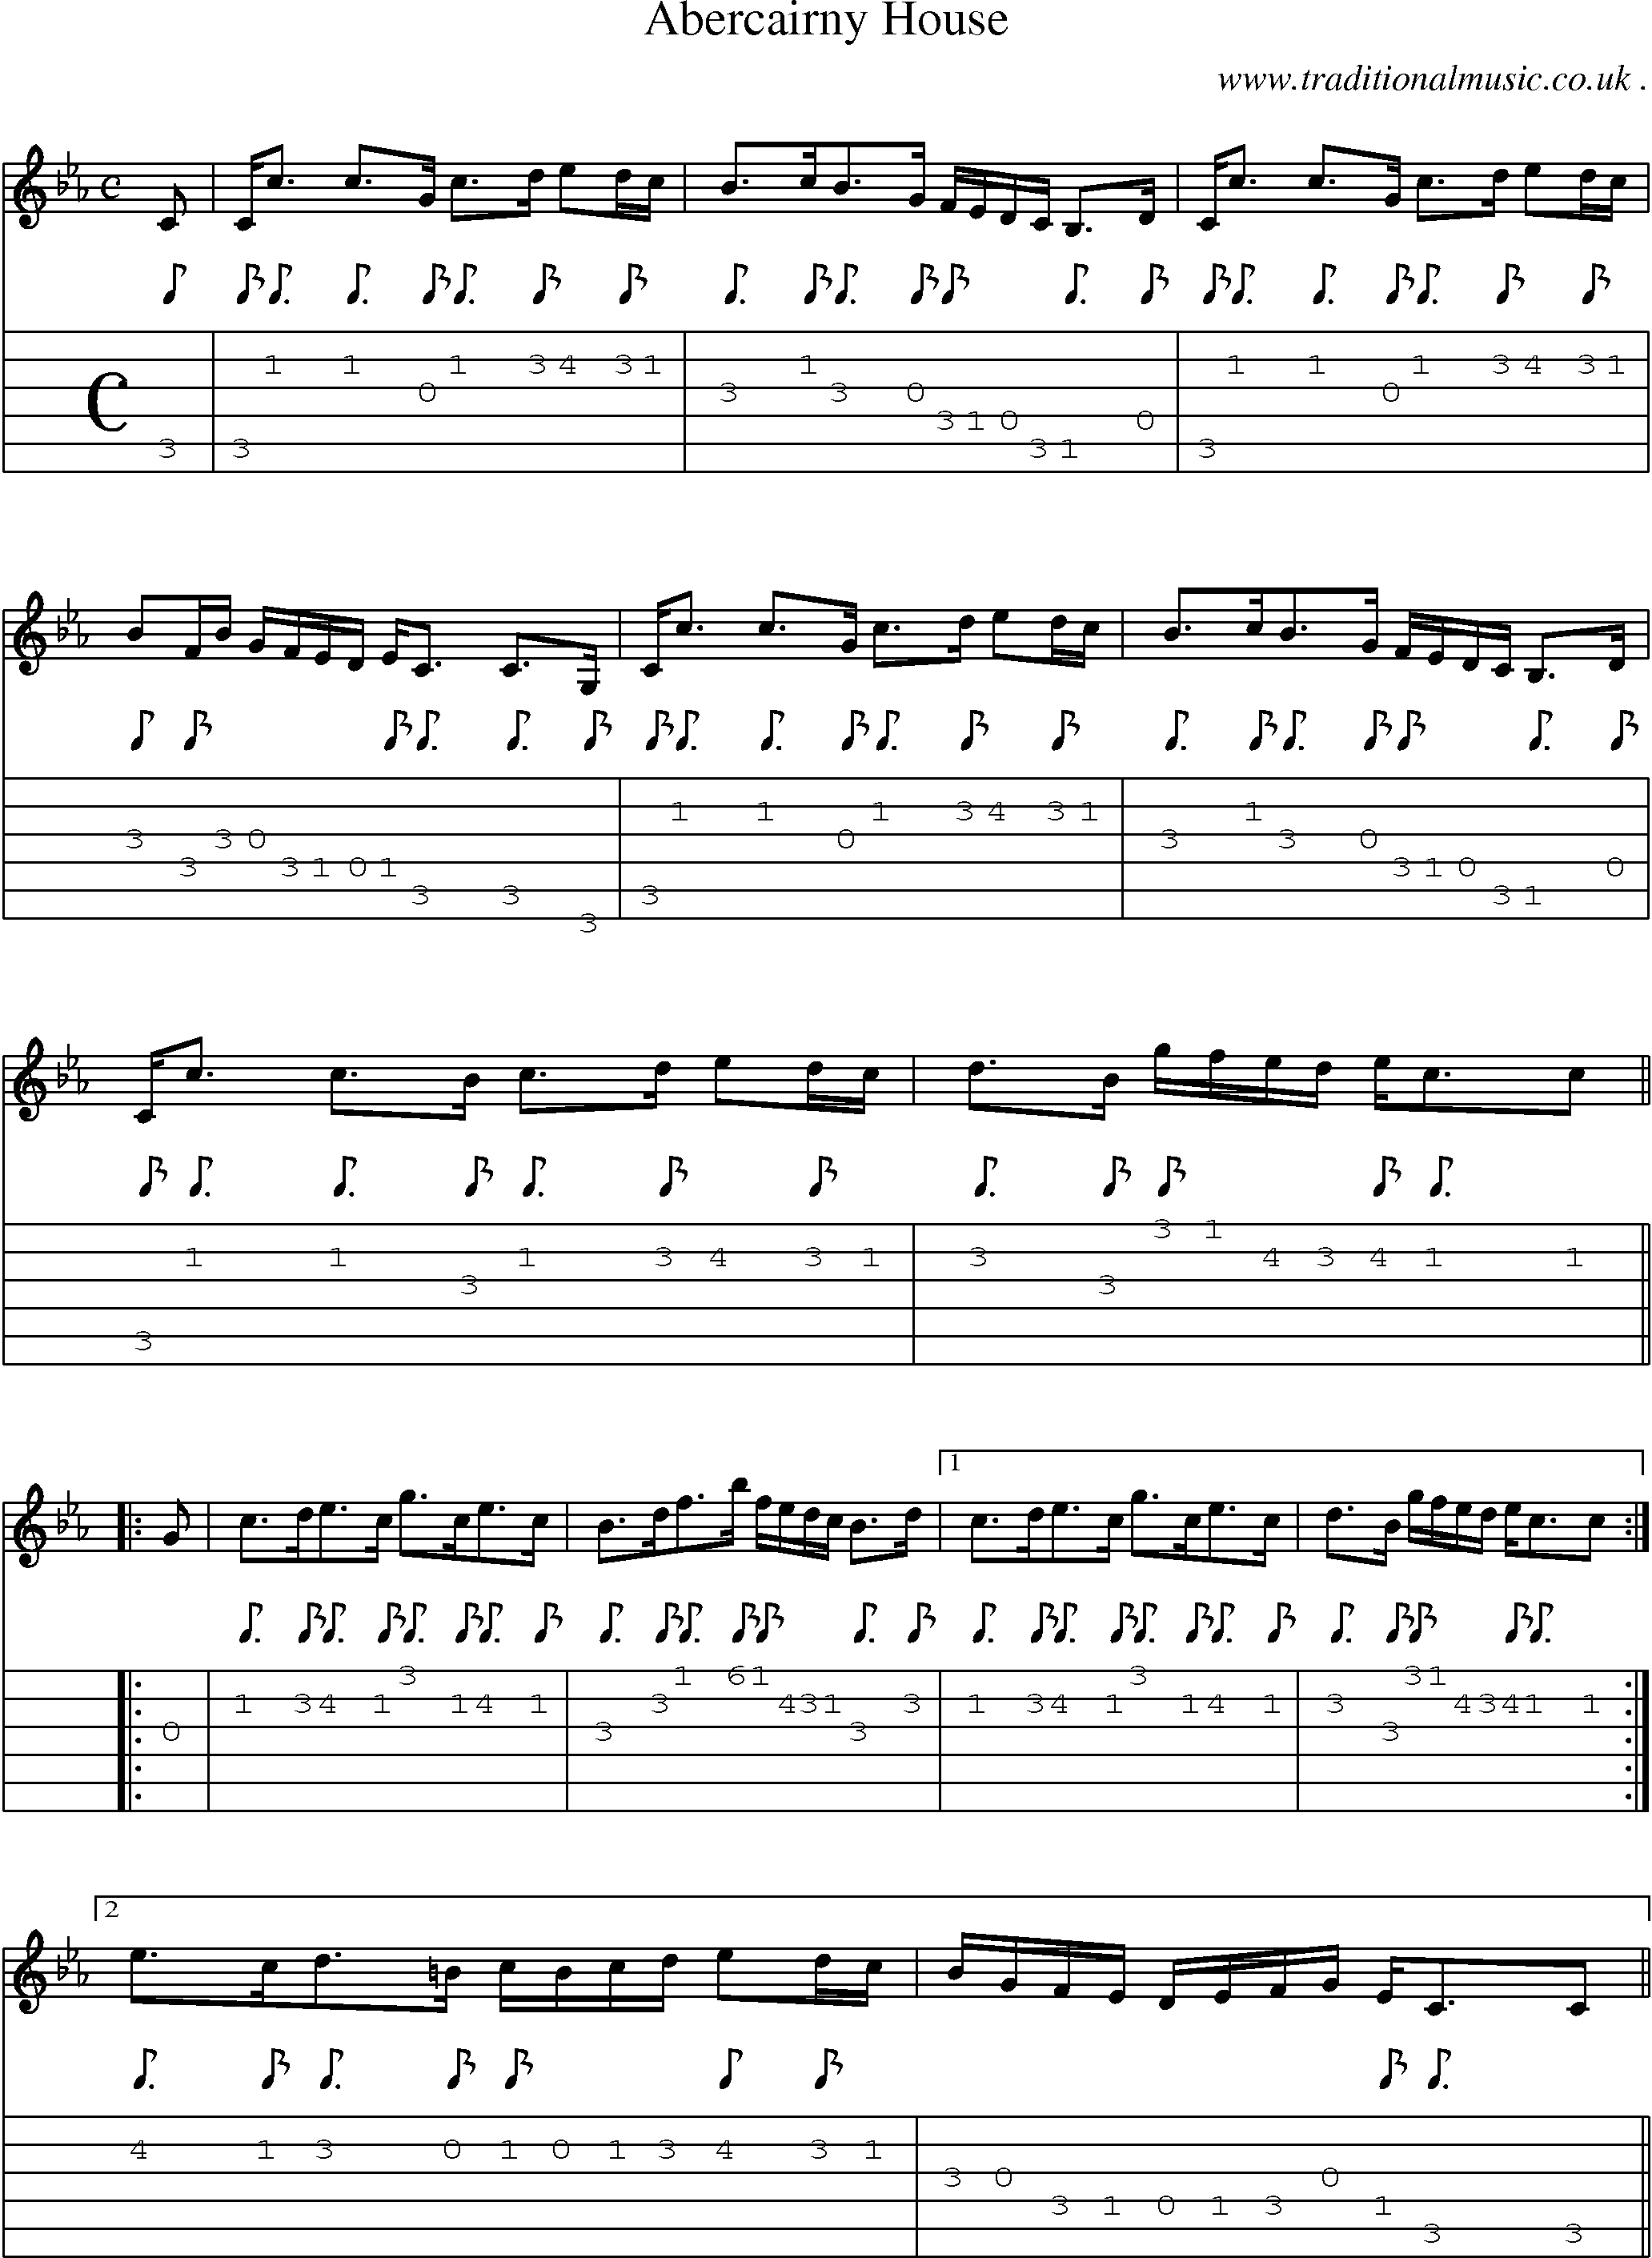 Sheet-music  score, Chords and Guitar Tabs for Abercairny House